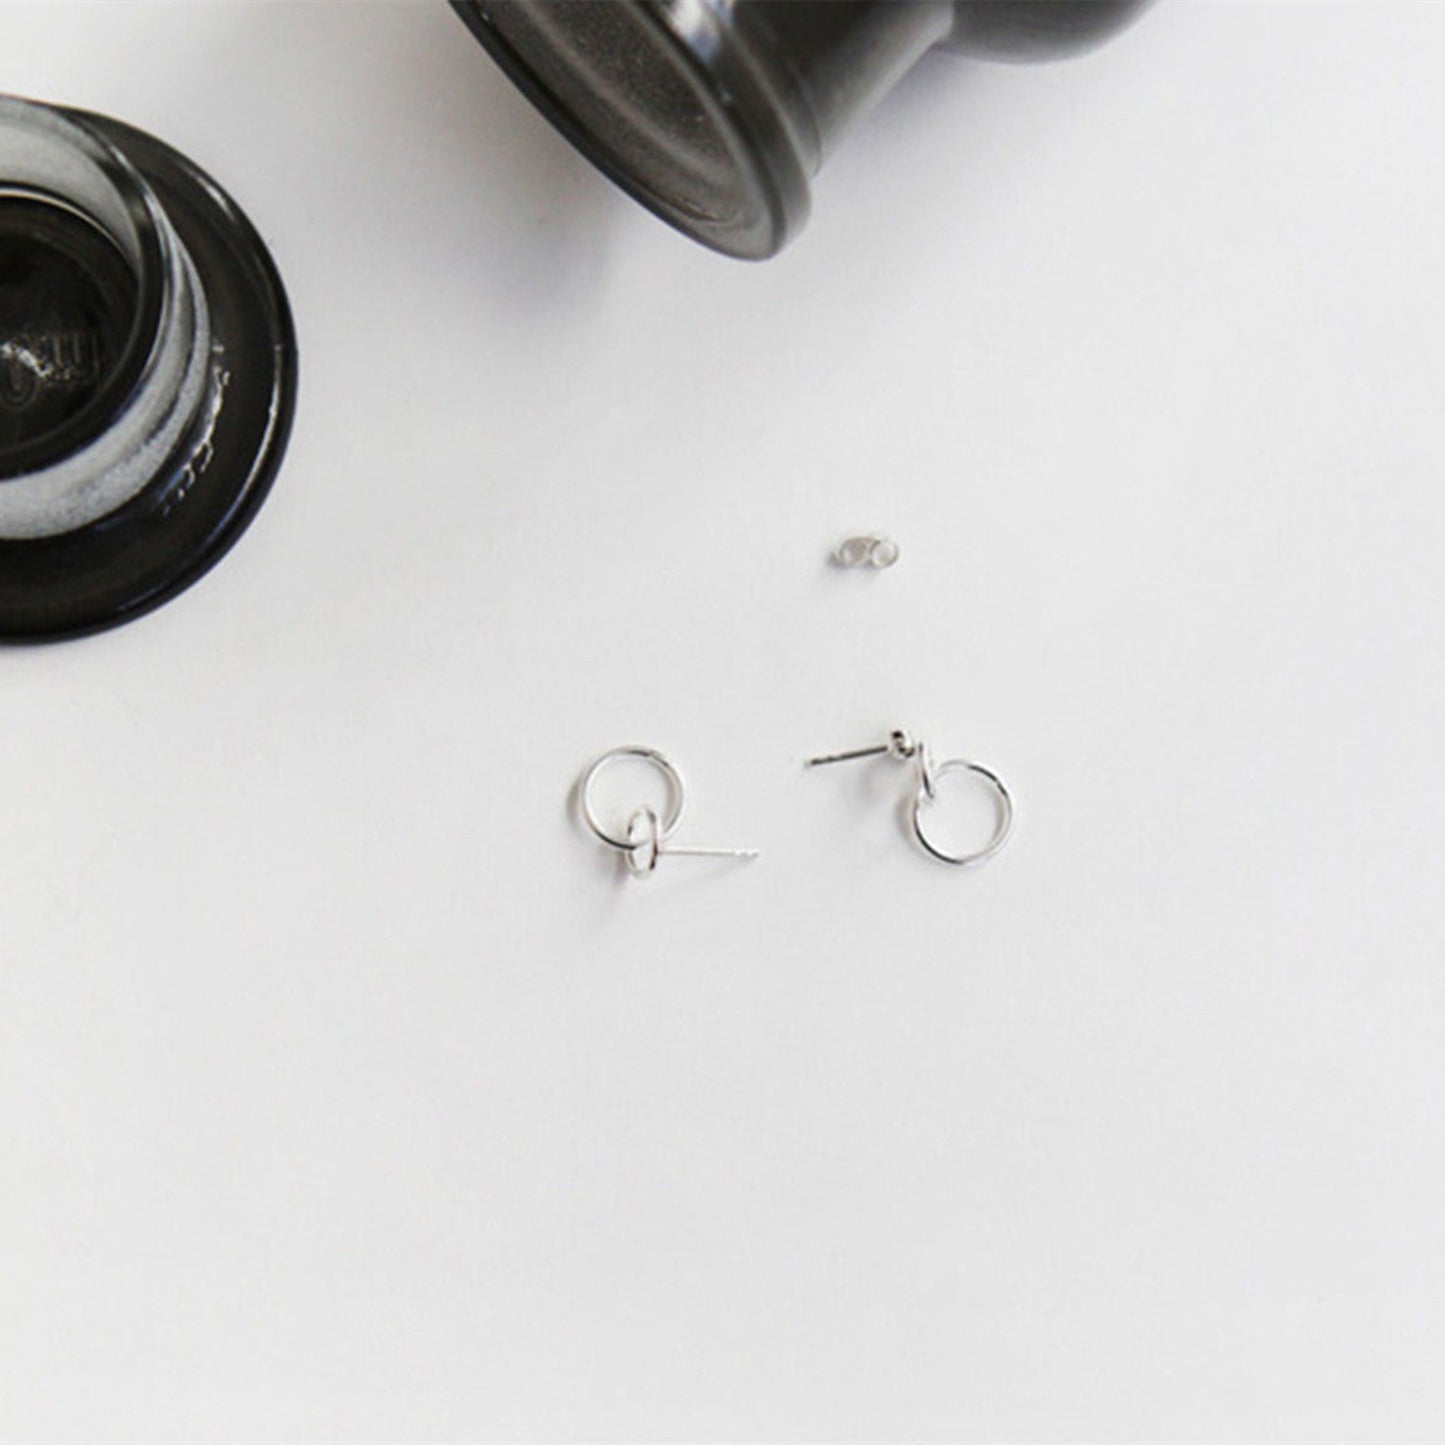 Sterling Silver Circle Drop Earrings with Infinity Link and Karma Symbol